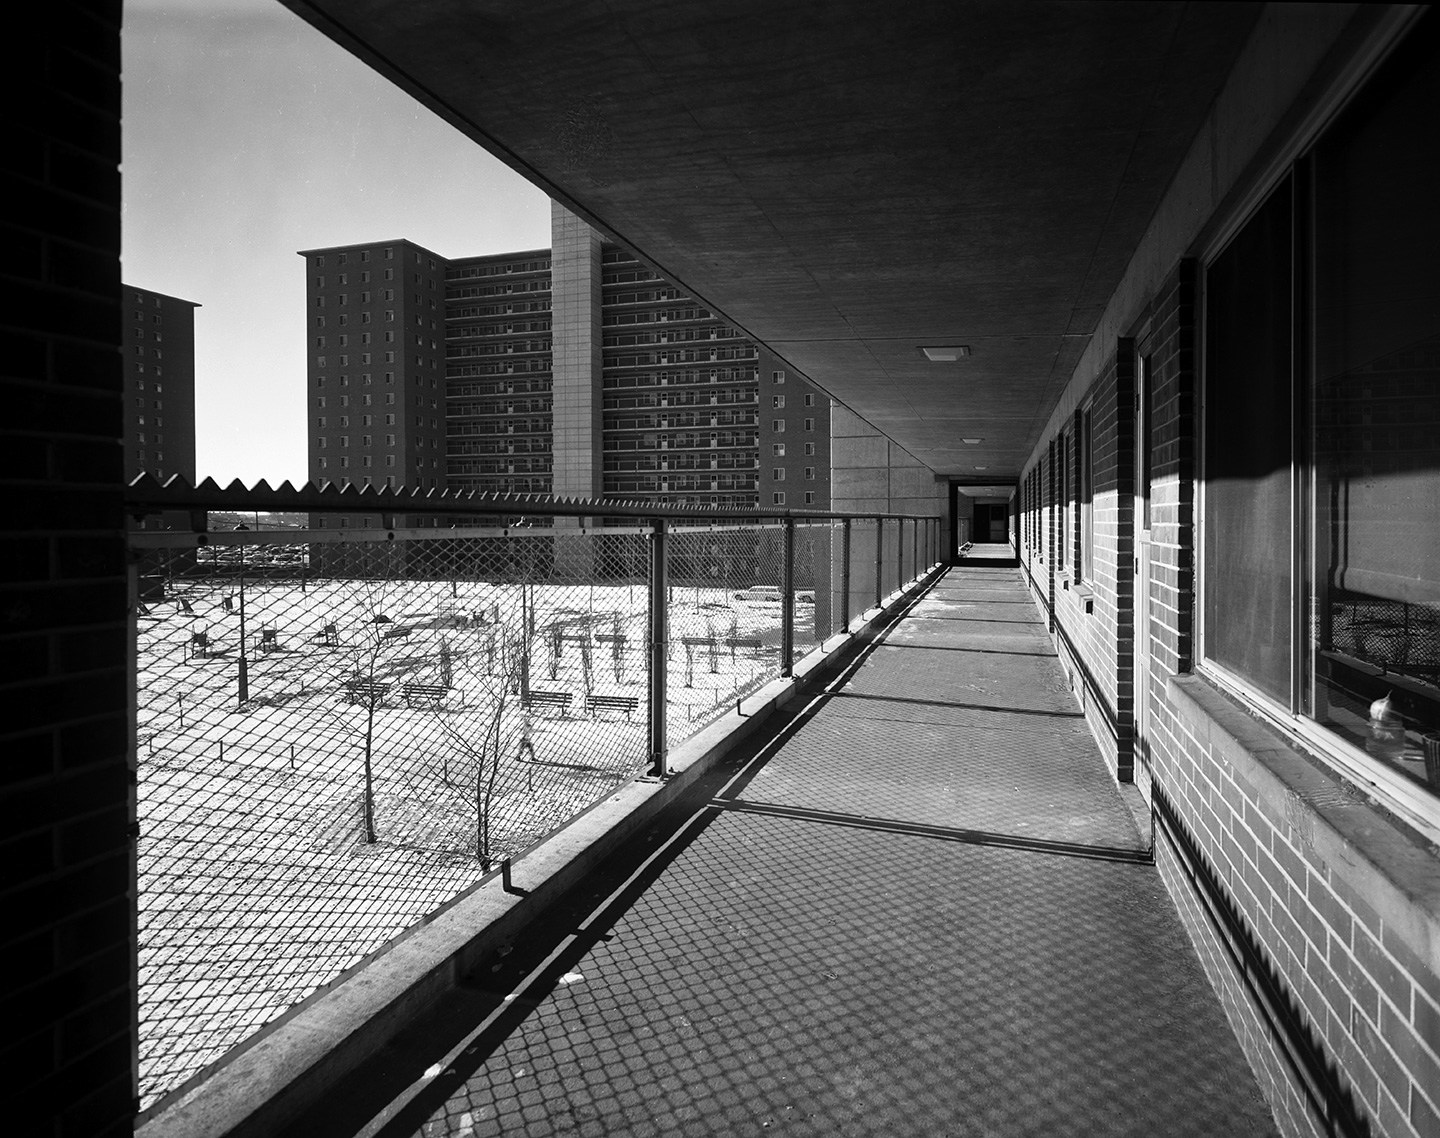 View of exterior walkway at Robert Taylor Homes public housing, Chicago, Illinois, January 3, 1963. (Photo by Hedrich-Blessing Collection/Chicago History Museum/Getty Images)